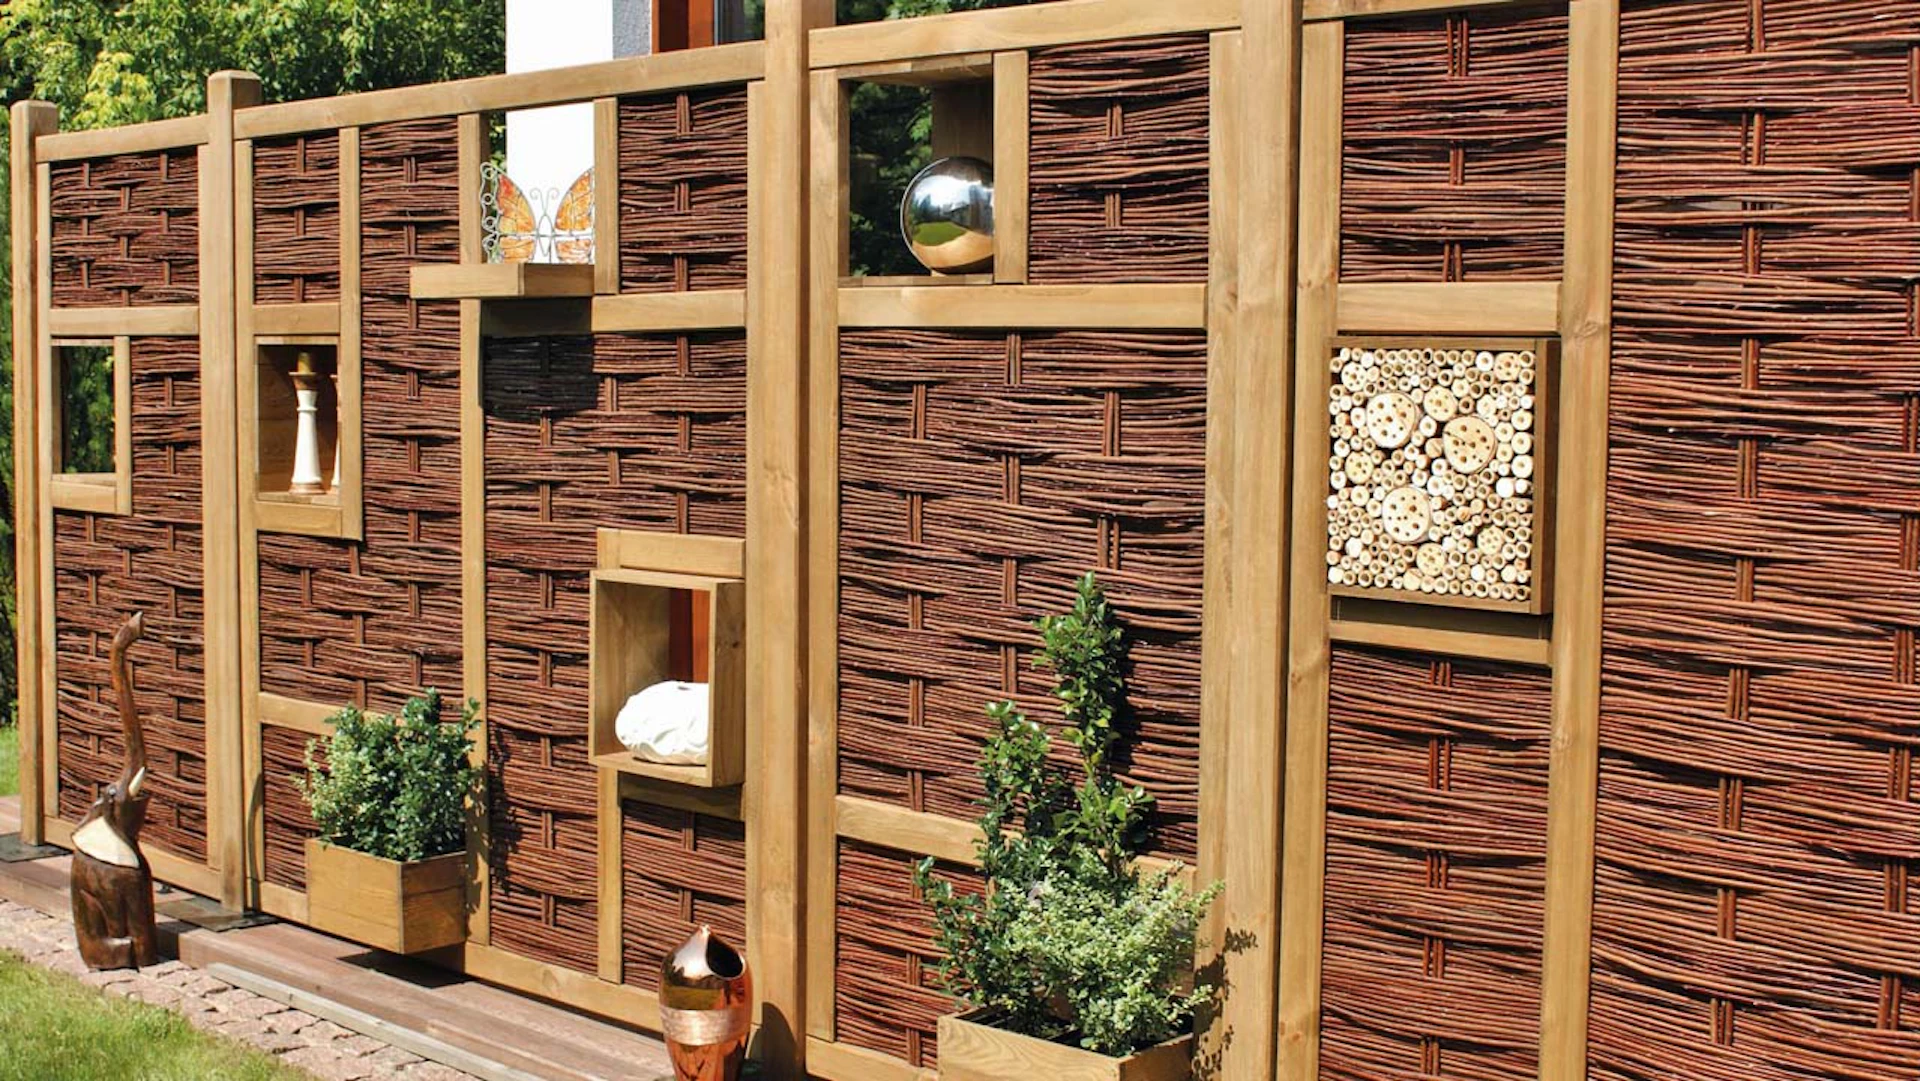 planeo TerraWood - CREATIVE-3D privacy screen wicker fence 4 windows 180 x 180 cm